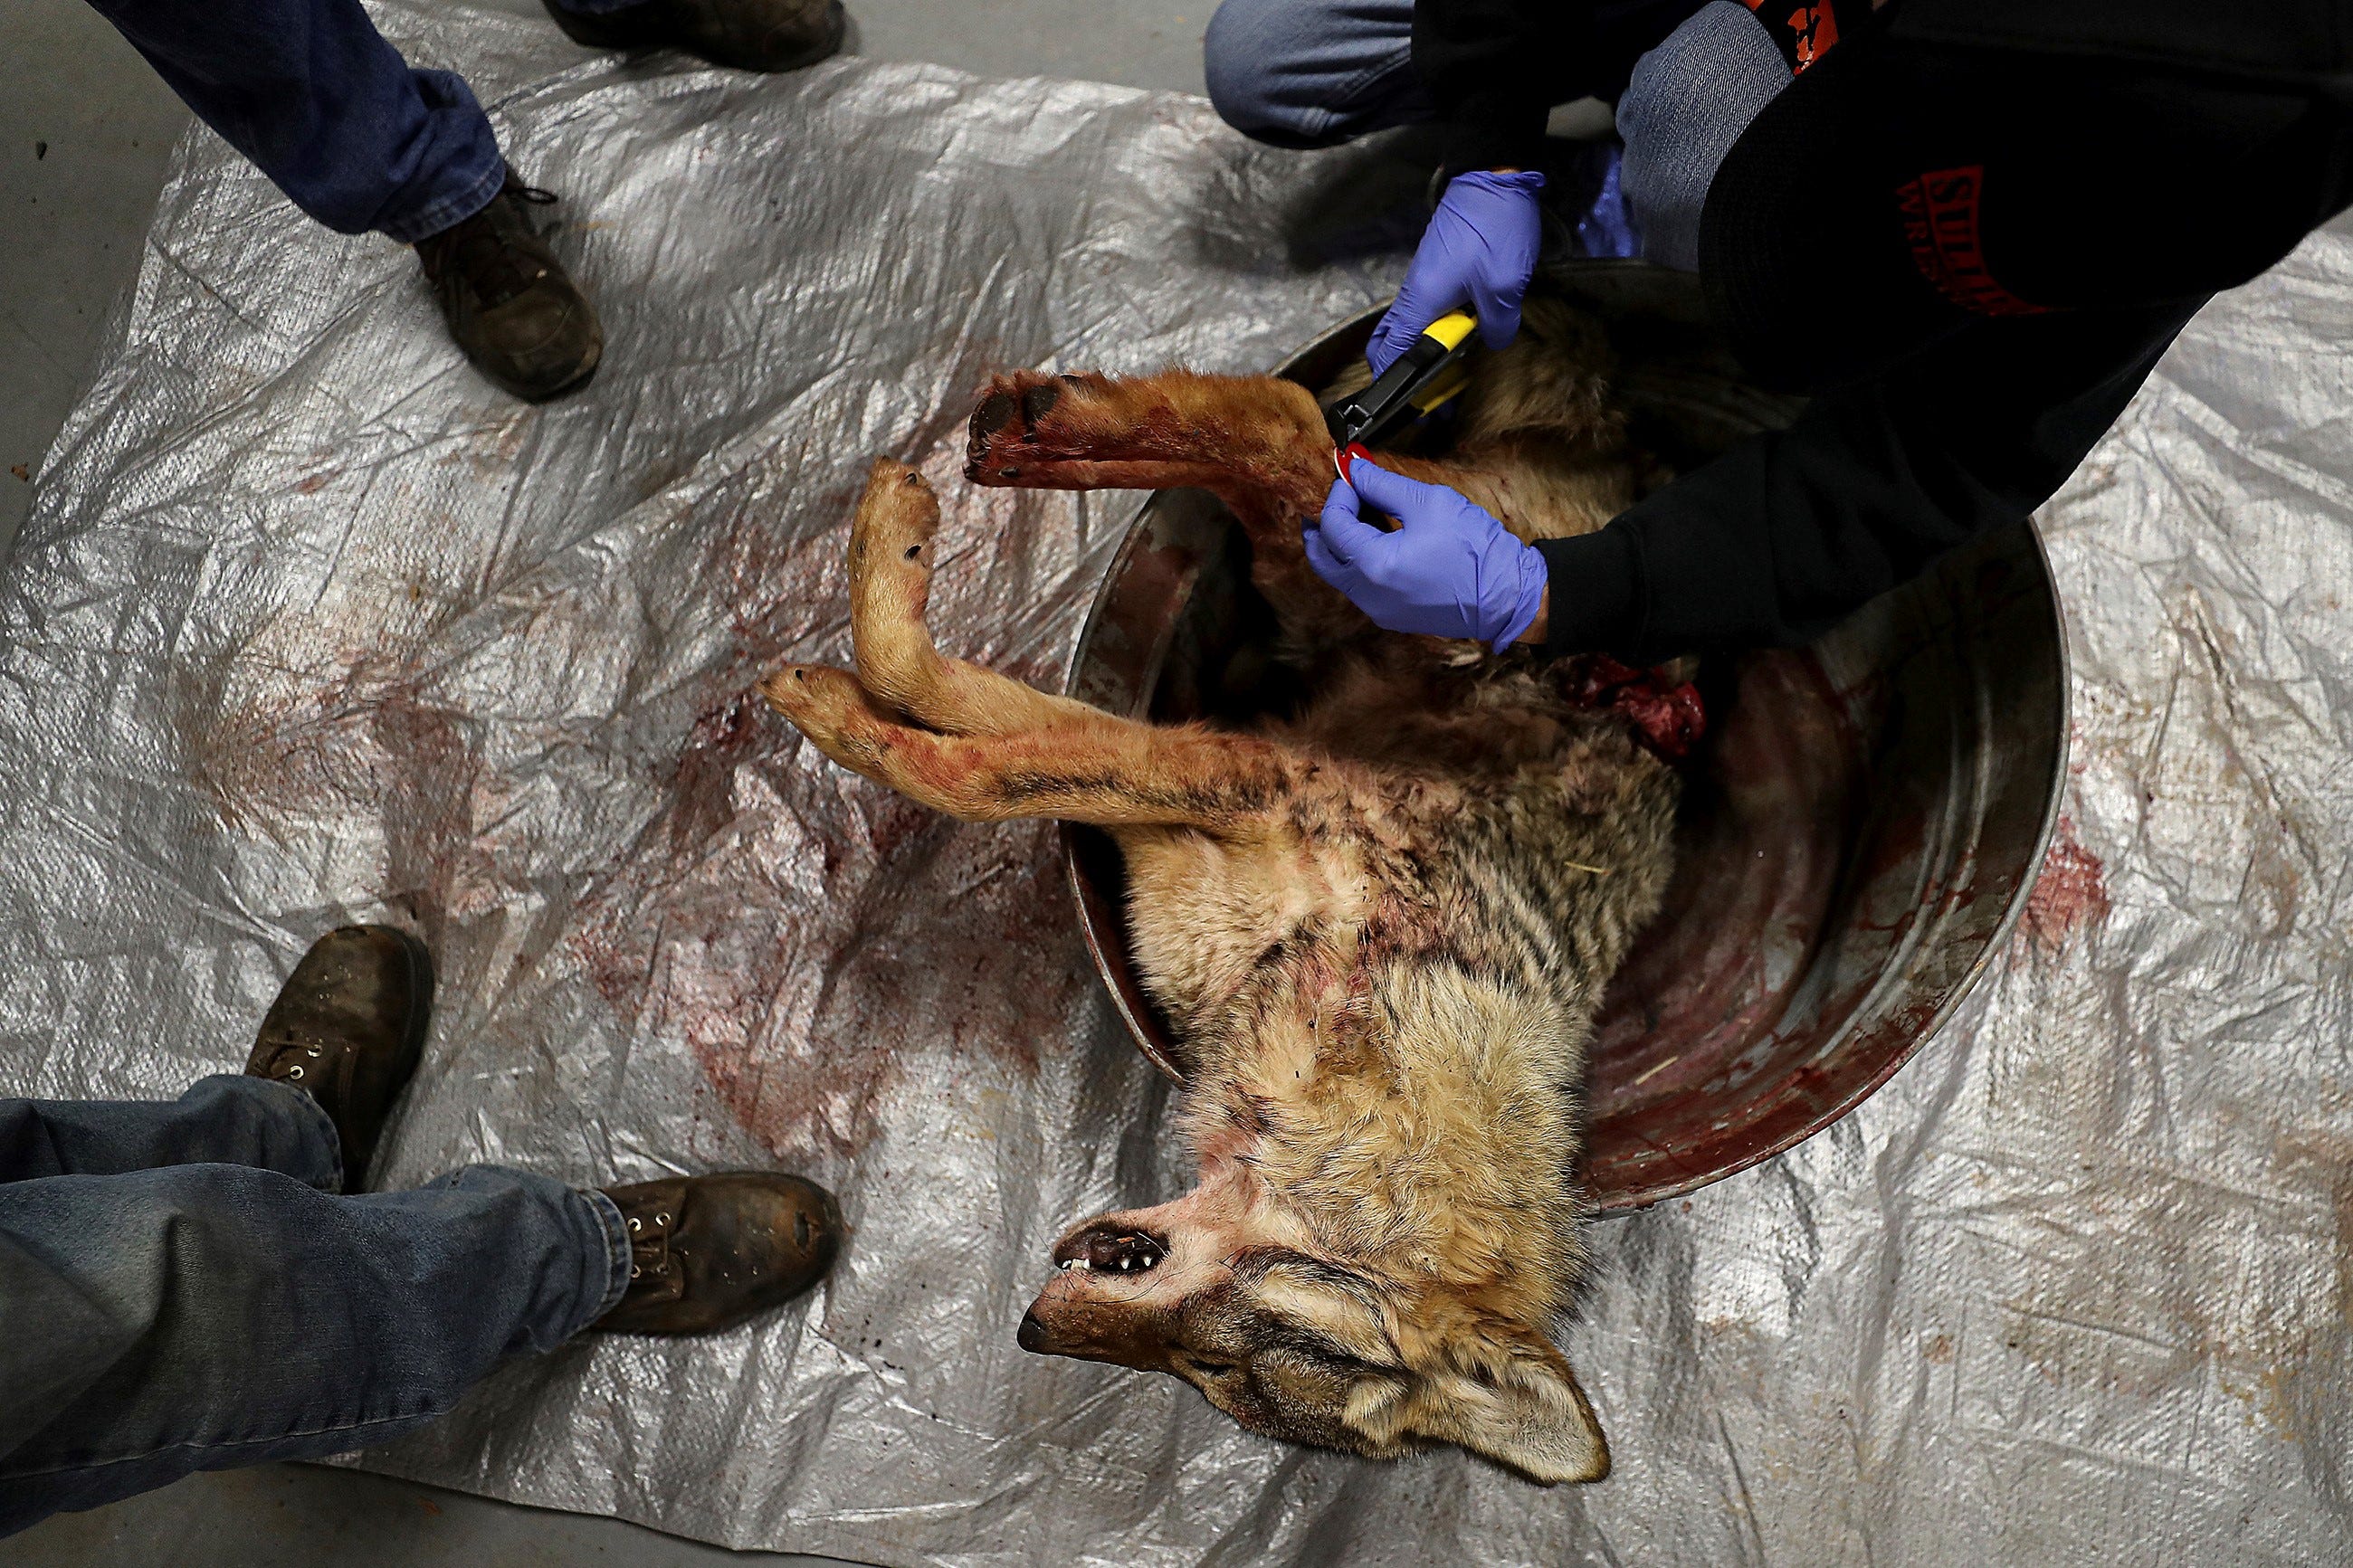 Organizers tag one of the coyotes brought into the firehouse during the 17th annual Sullivan County Coyote Hunt in Laporte, Pa., Sunday, Feb. 23, 2020. Although proponents say the coyote population needs to be controlled, many opponents of these killing contest-style hunts say they're barbaric and disrupt the natural balance, taking out a keystone predator that controls rodent and pest populations and keeps feral cats, raccoons, and skunks in check as well. (David Maialetti/The Philadelphia Inquirer via AP)